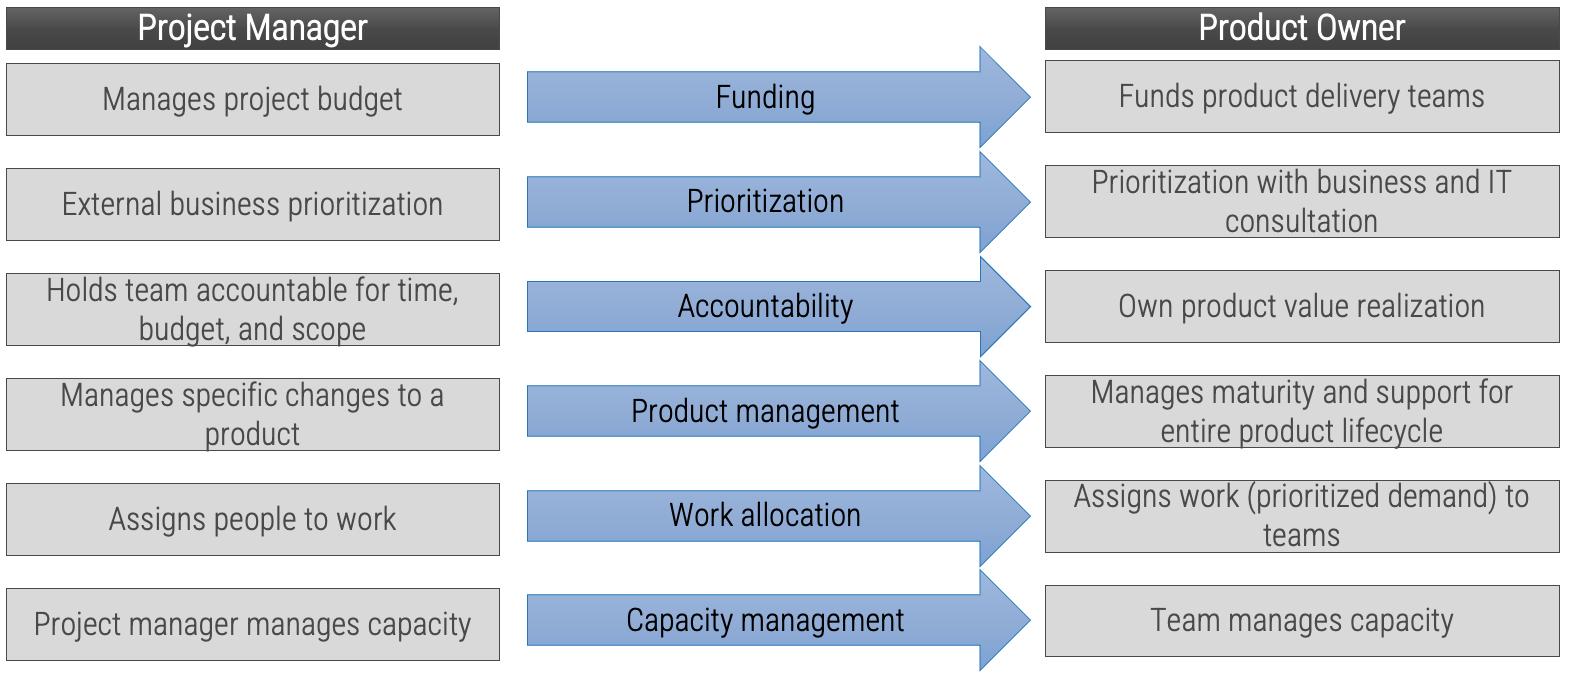 Differences between Project Manager and Product Owners in regards to: Funding, Prioritization, Accountability, Product management, Work allocation, and Capacity management.